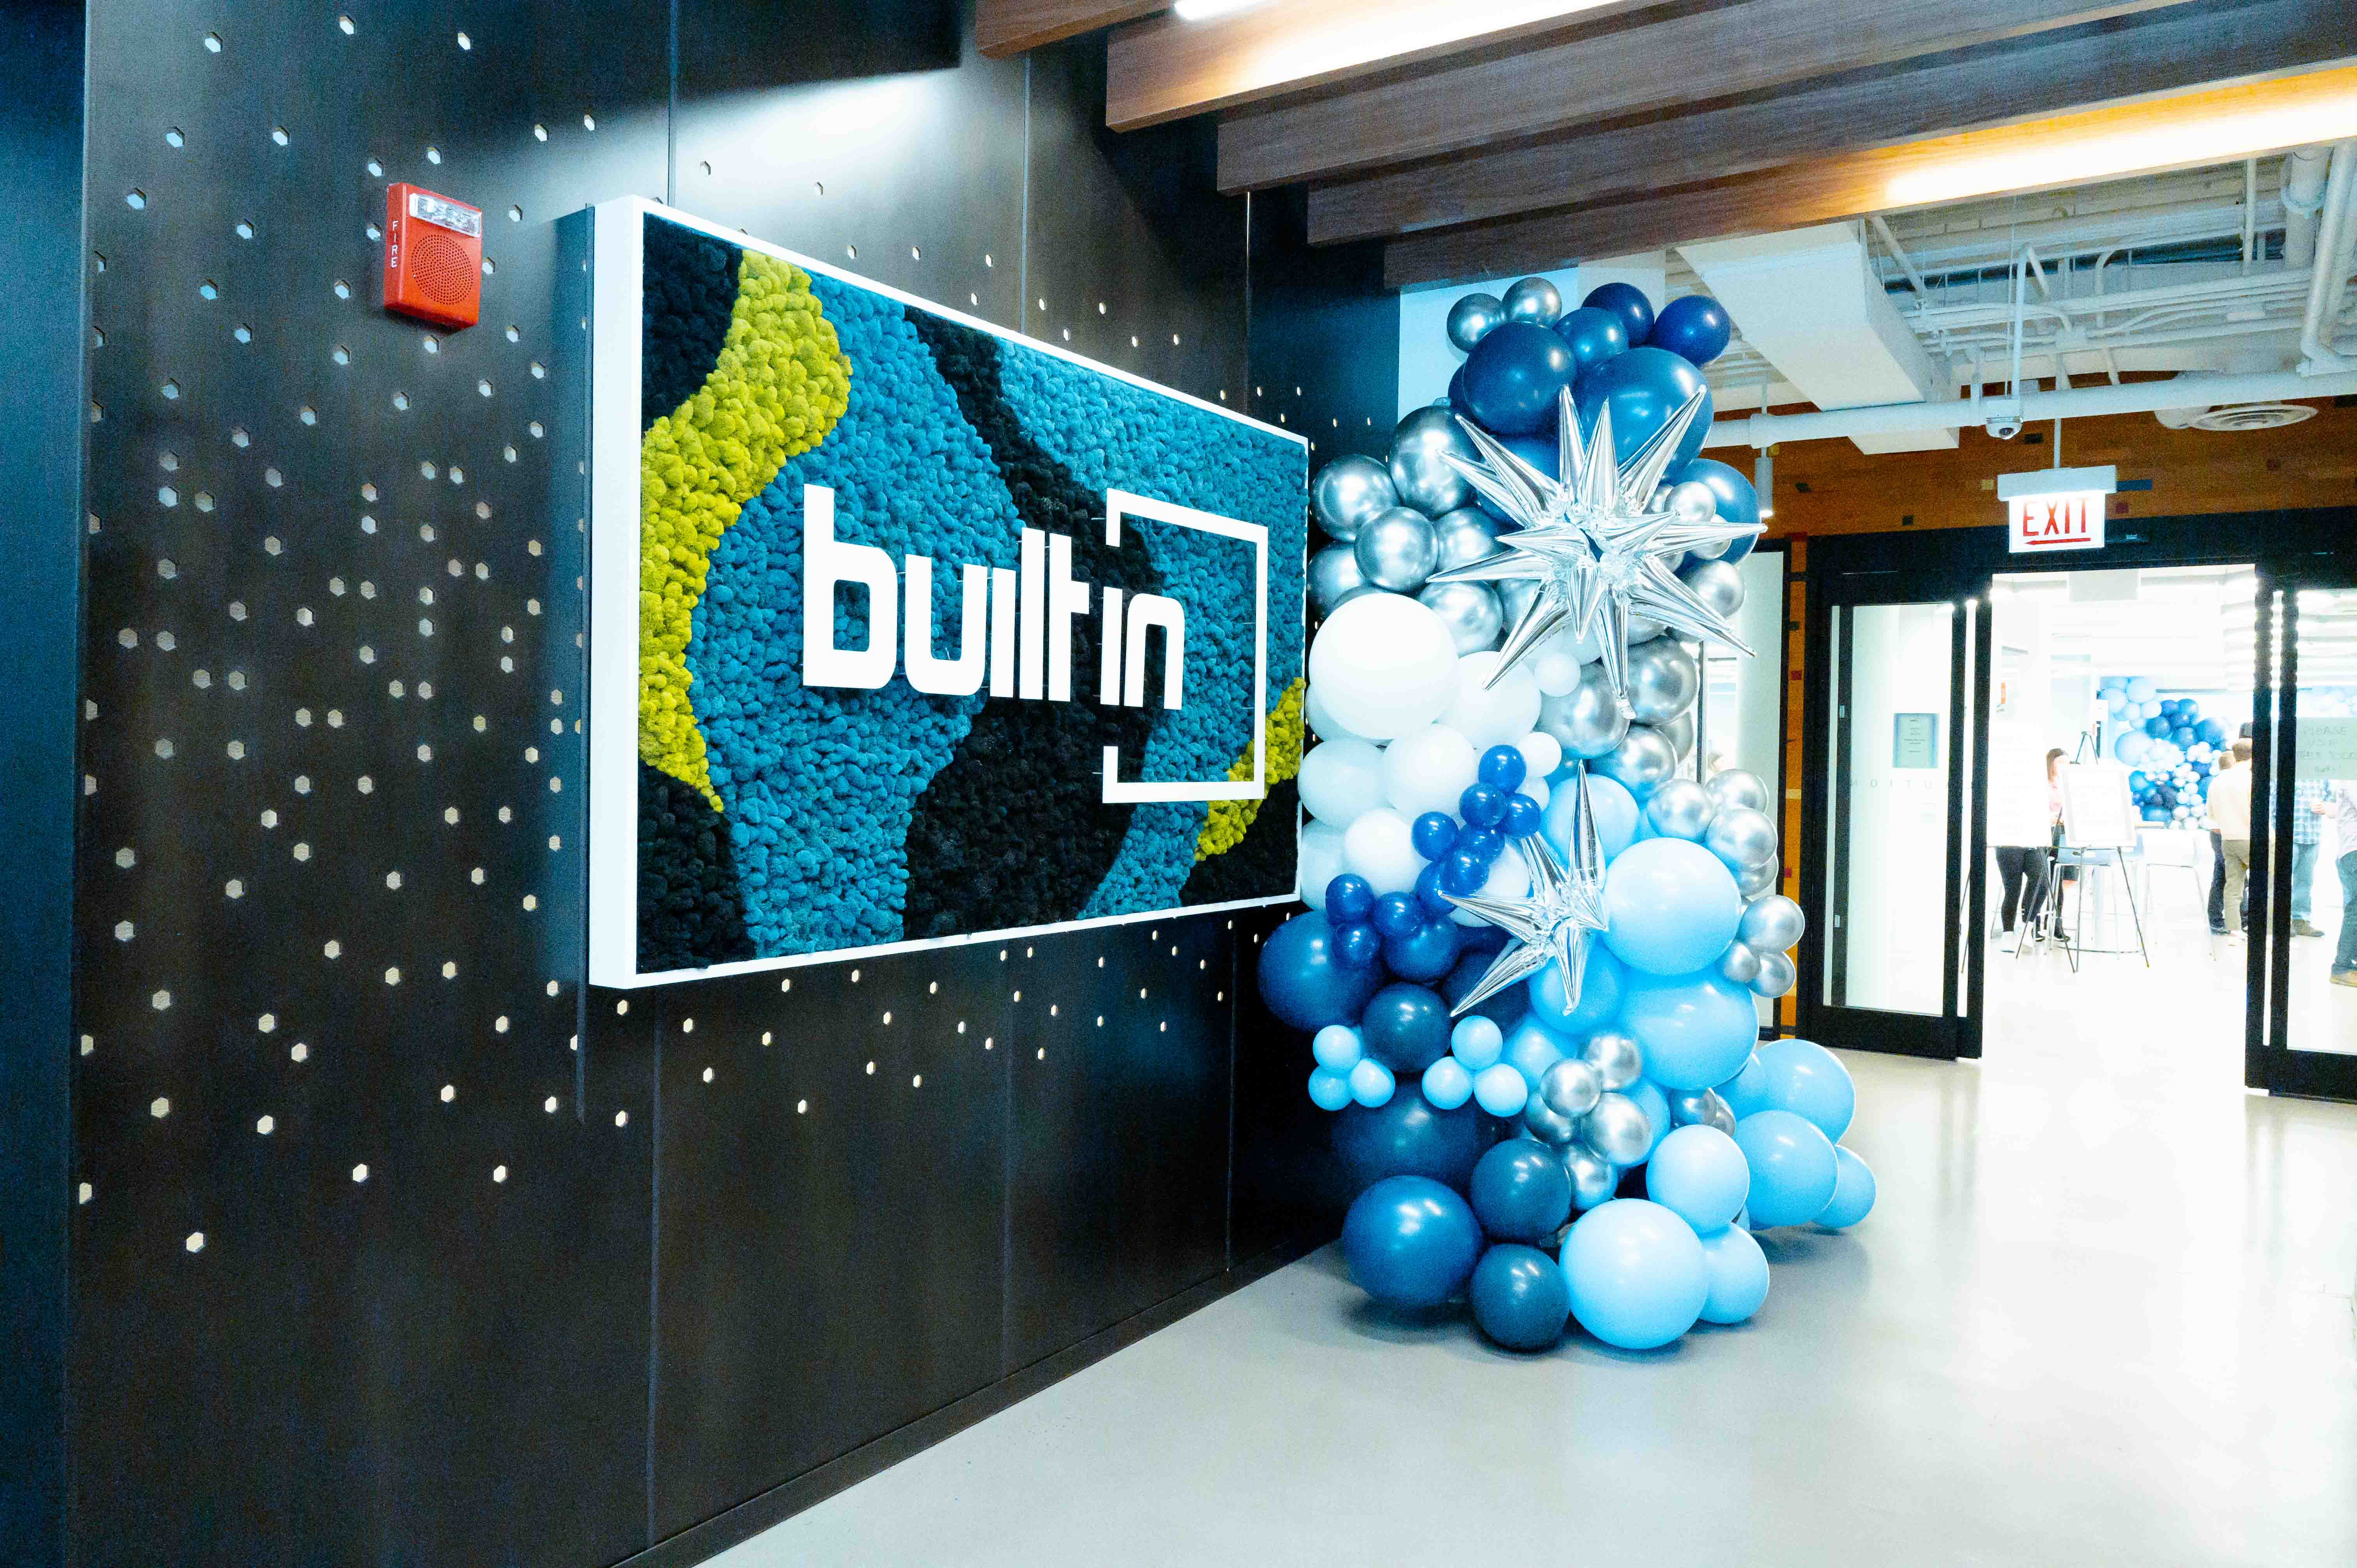 Artwork featuring the Built In logo against multicolored moss on the wall next to a bouquet of white, silver and blue balloons.